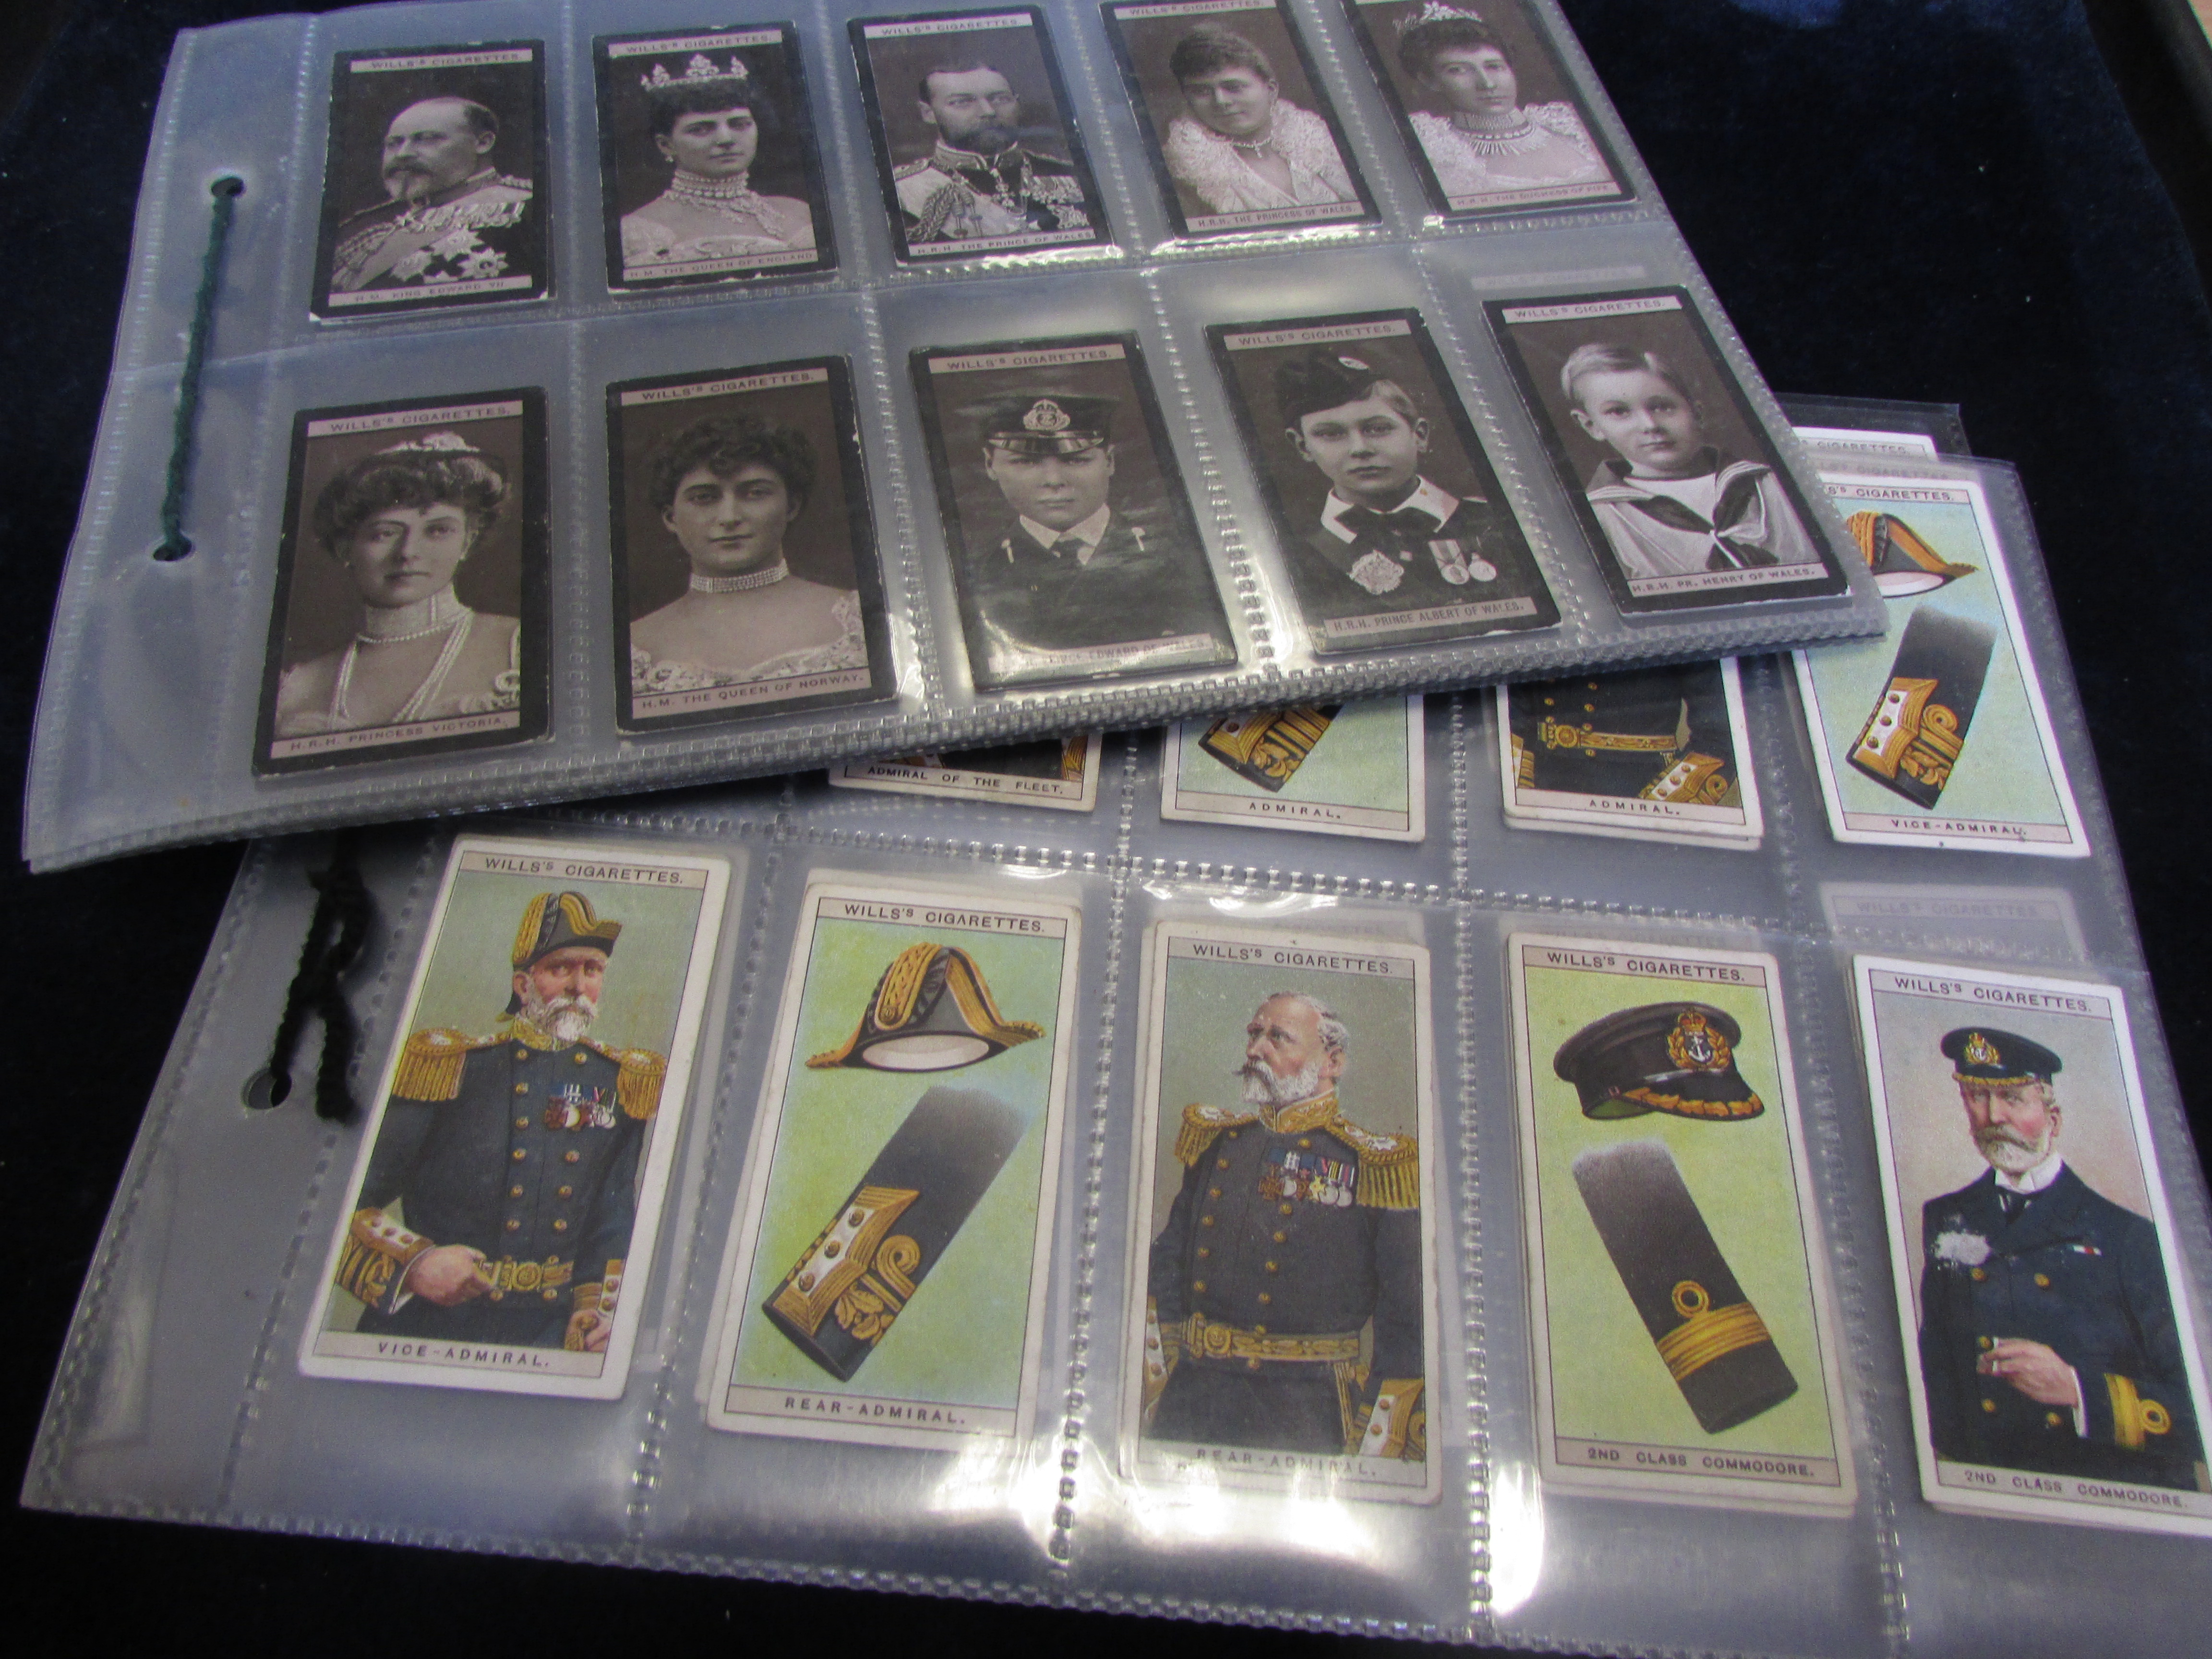 Wills sets in sleeves, Naval Dress & Badges, Portraits of European Royalty (1-50) and (51-100),